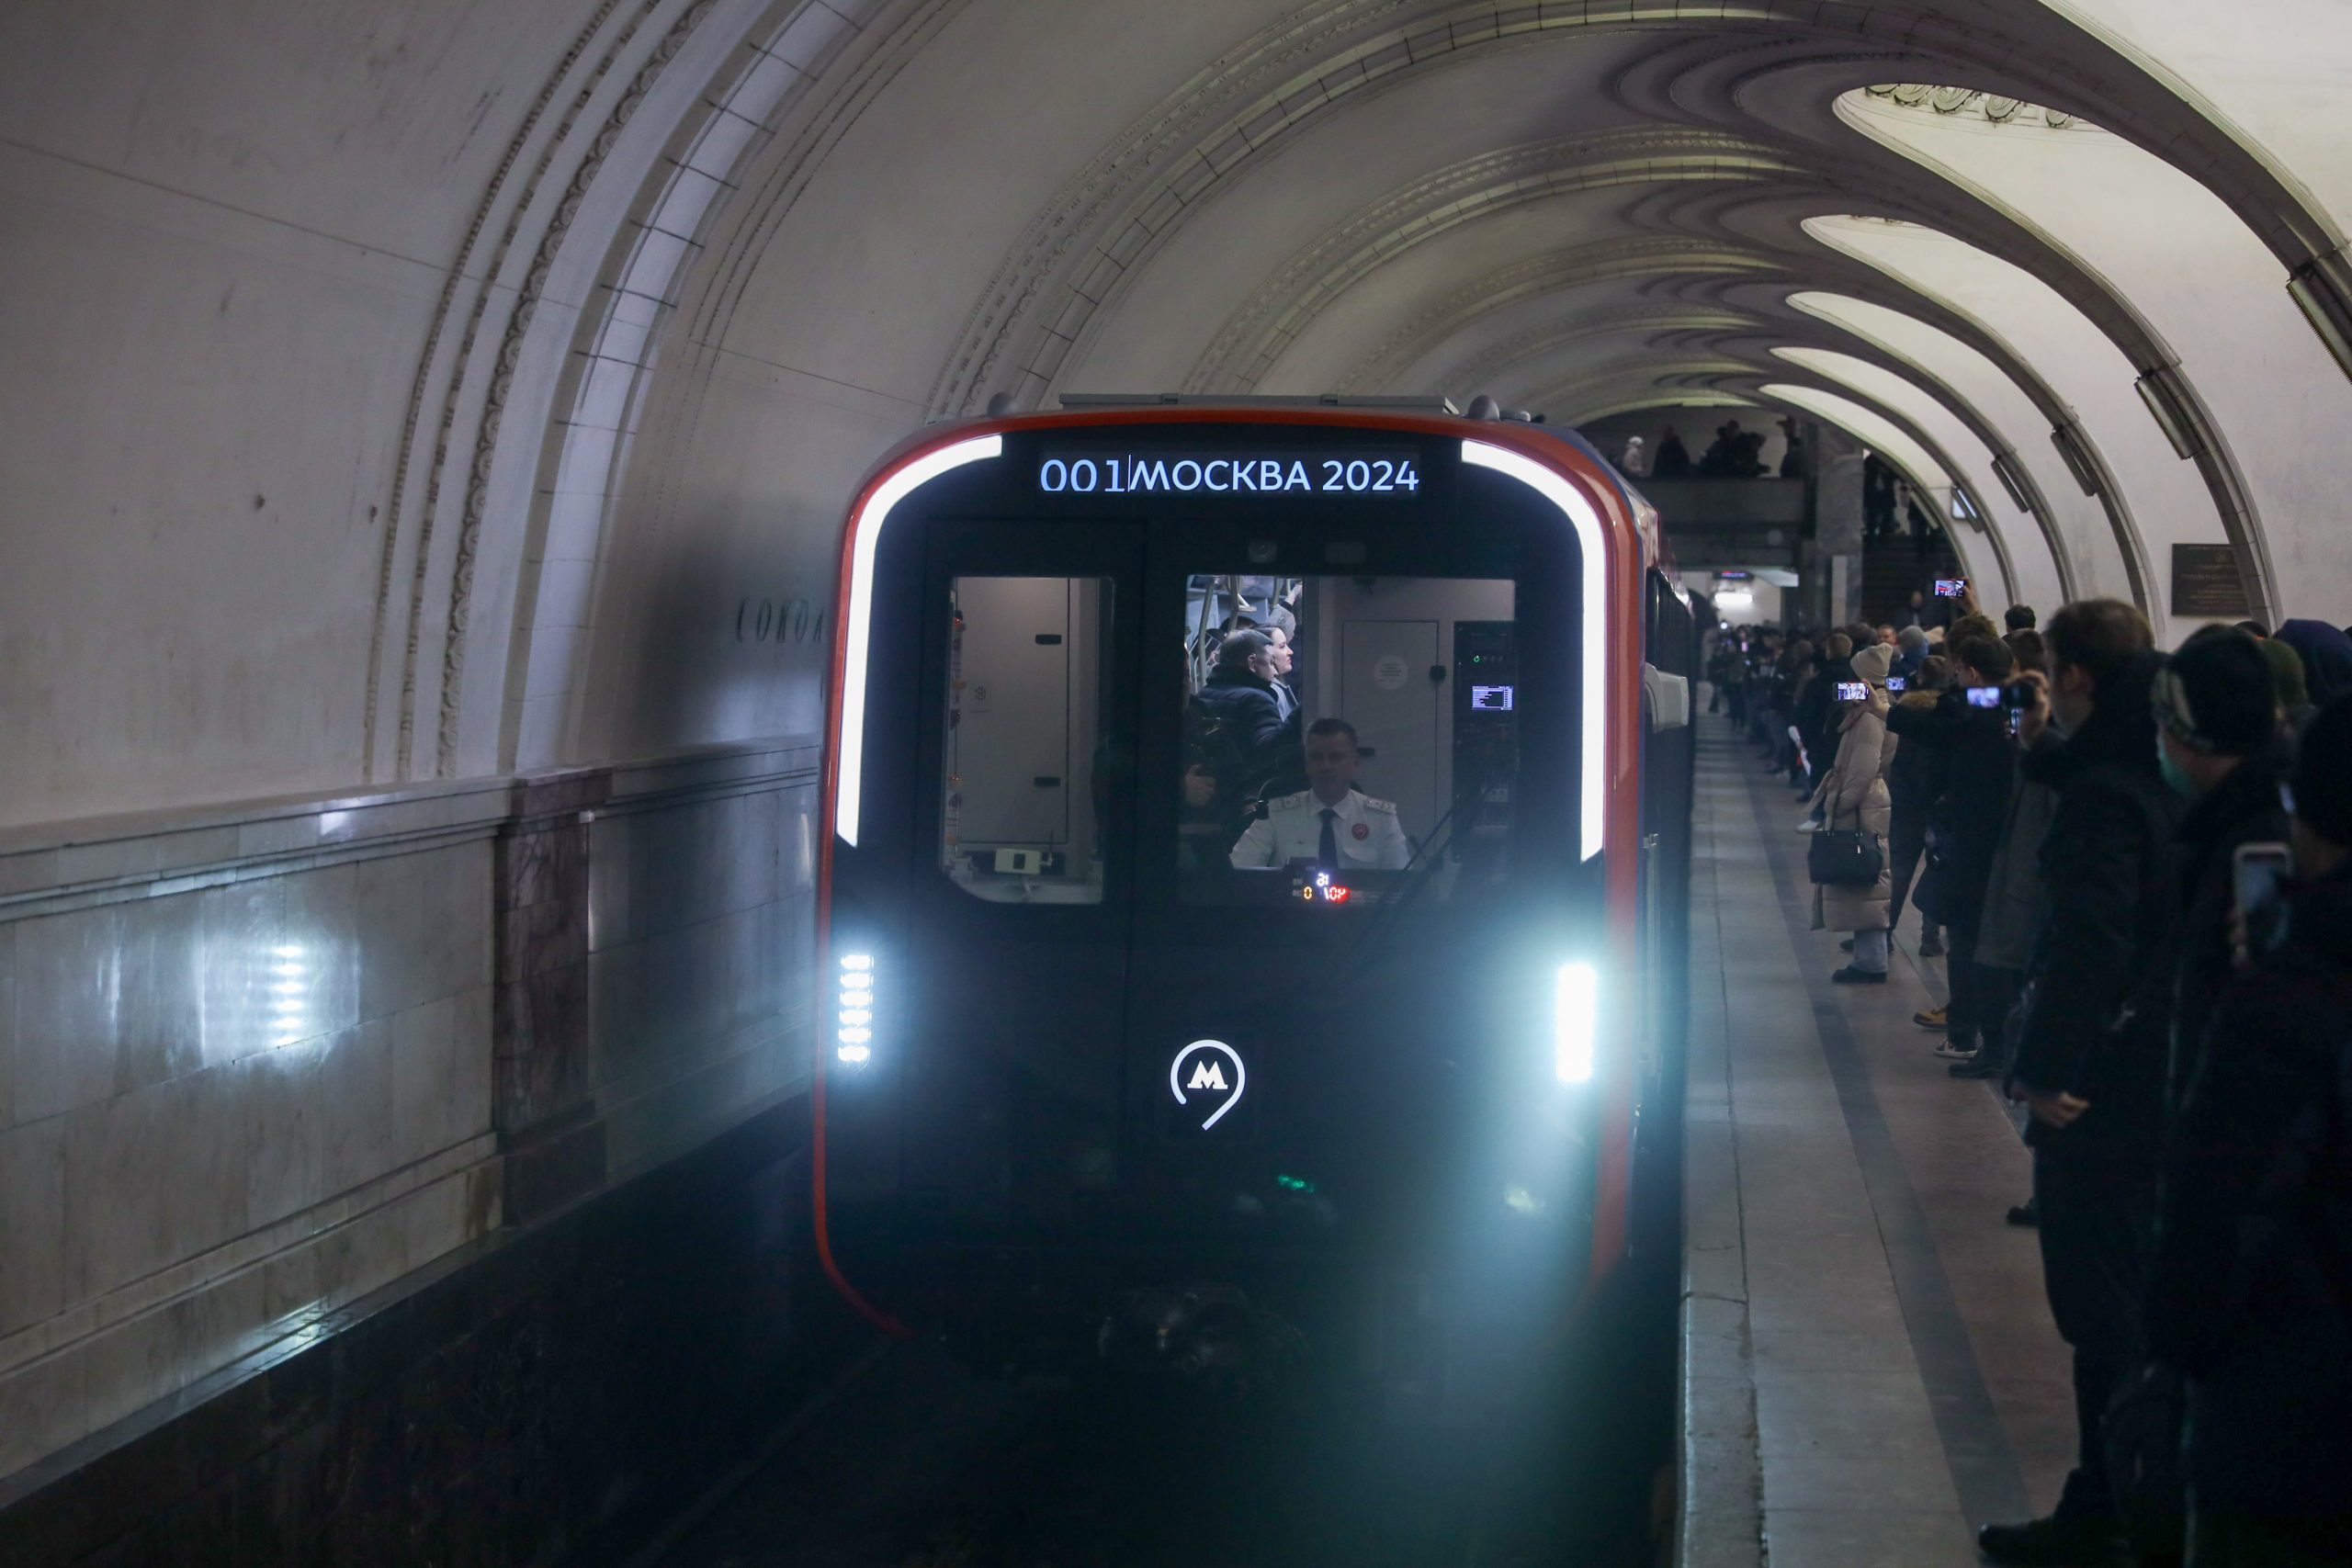 Launch of the new Moskva-2024 metro in Moscow